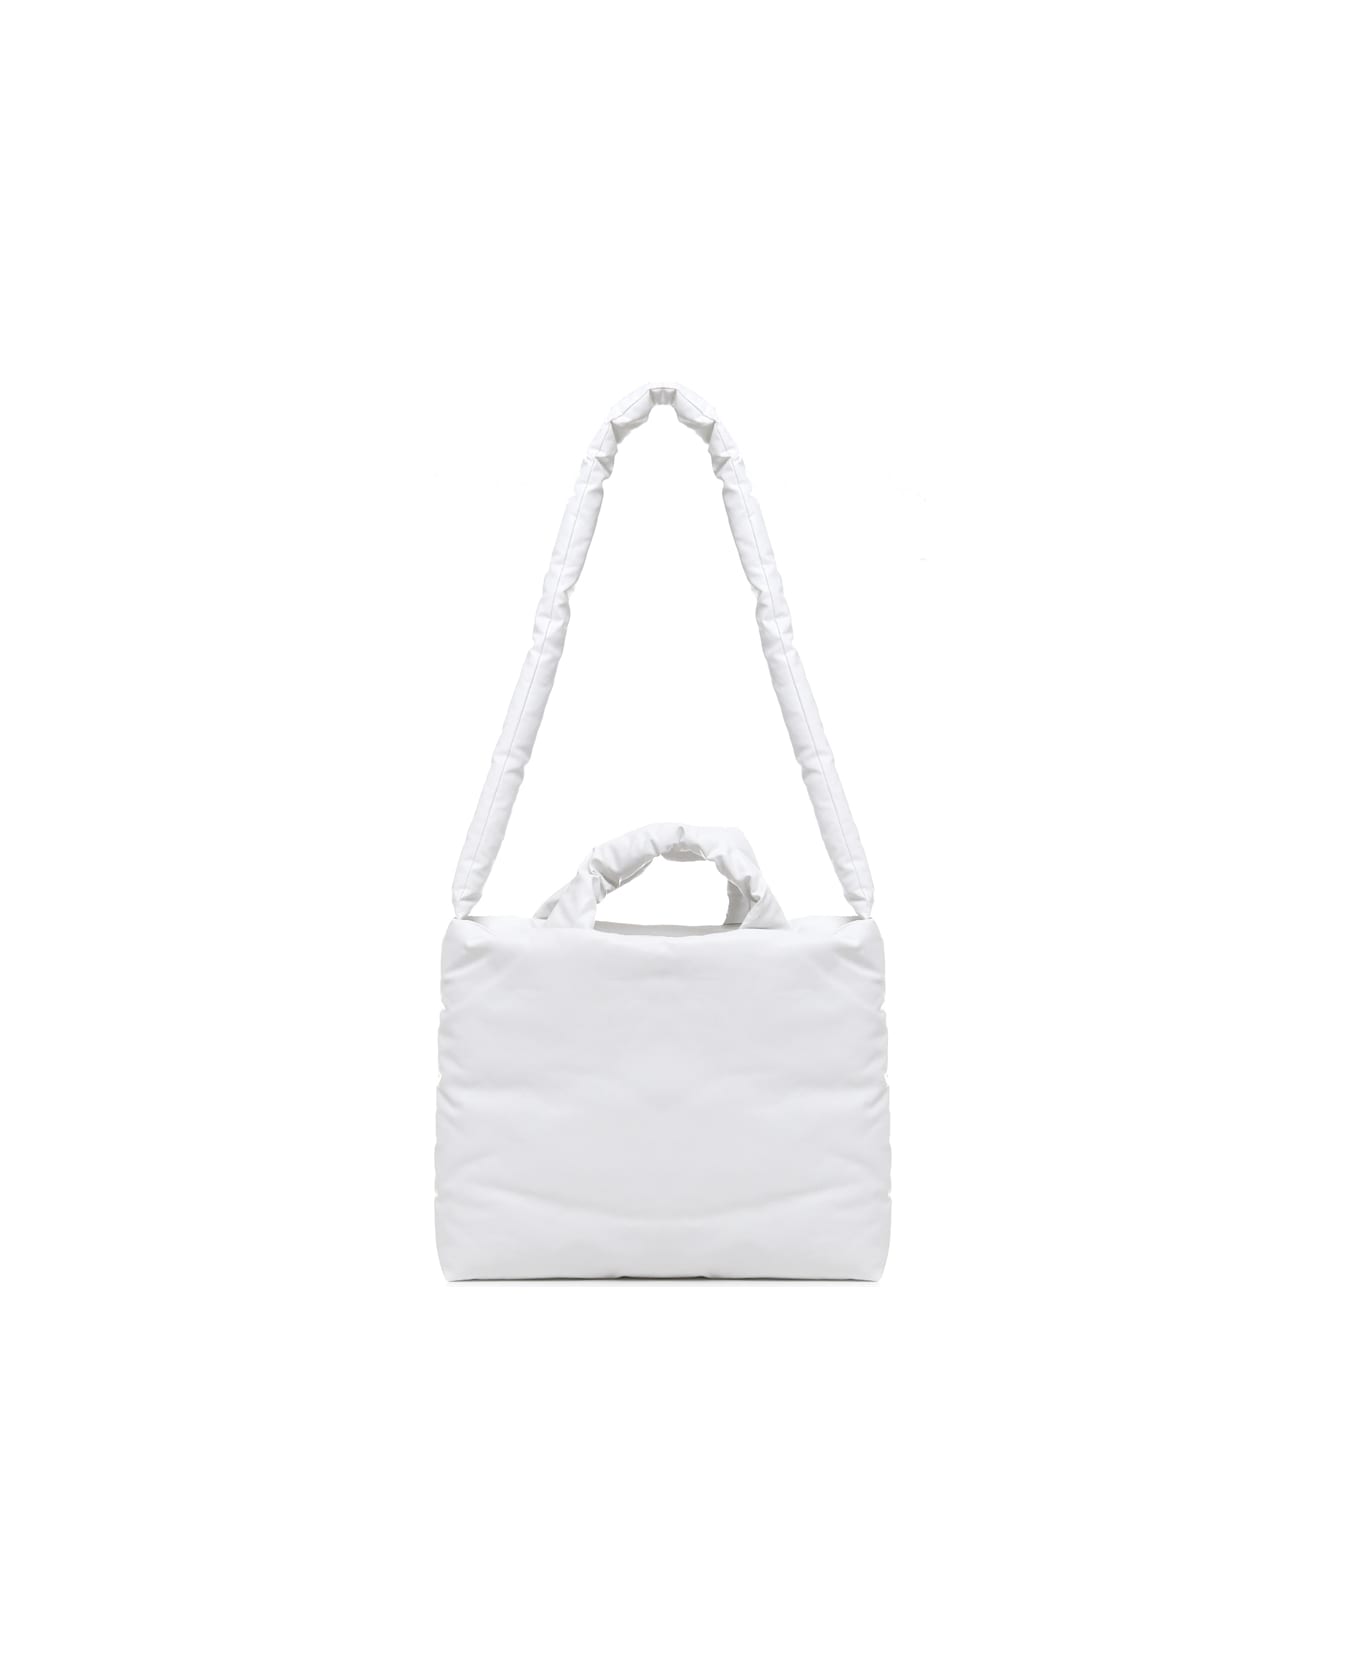 KASSL Editions Pillow Small Oil Bag - White